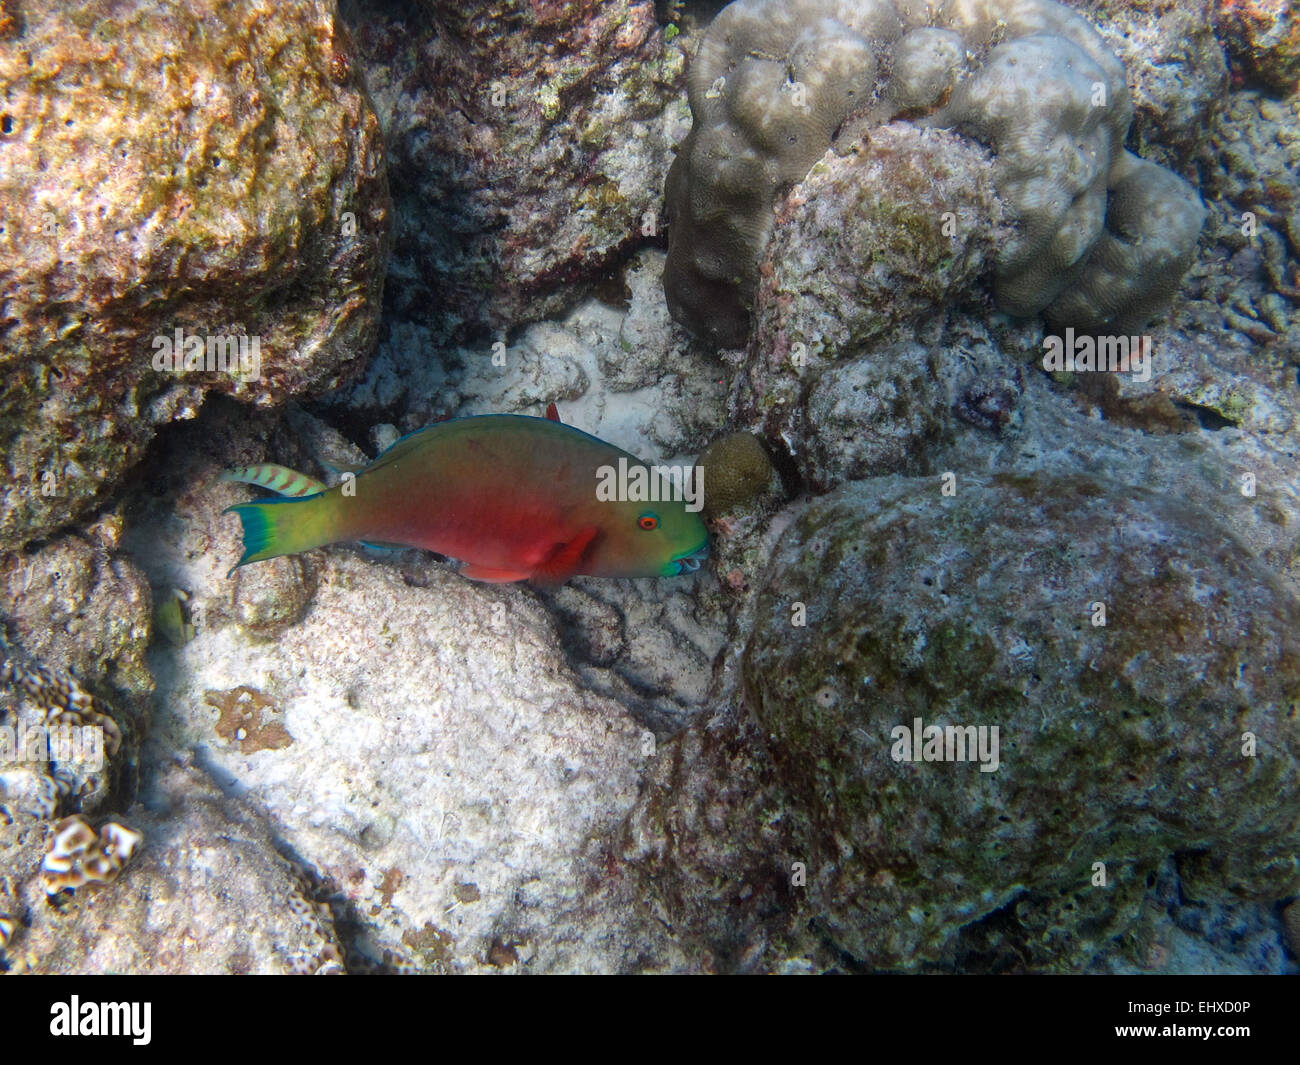 Roundhead Parrotfish (Initial phase) on a coral reef in the